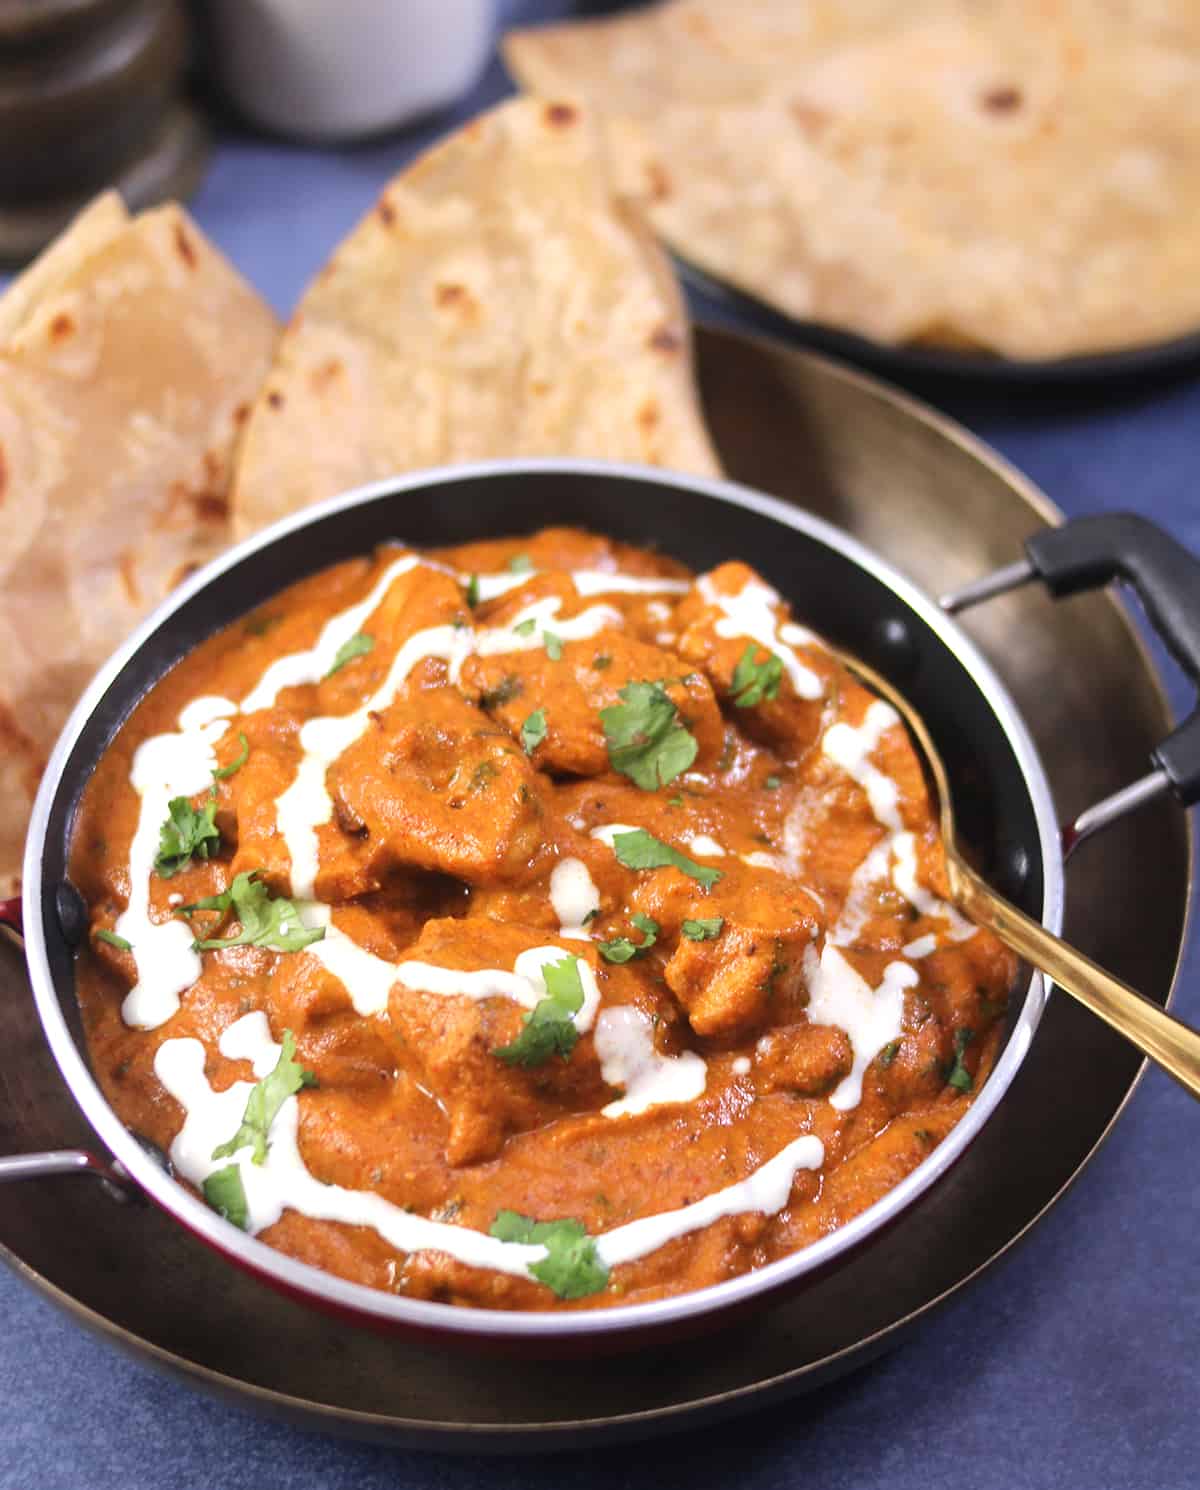 Creamy chicken makhani, butter chicken curry sauce drizzled with cream and served with Indian bread.